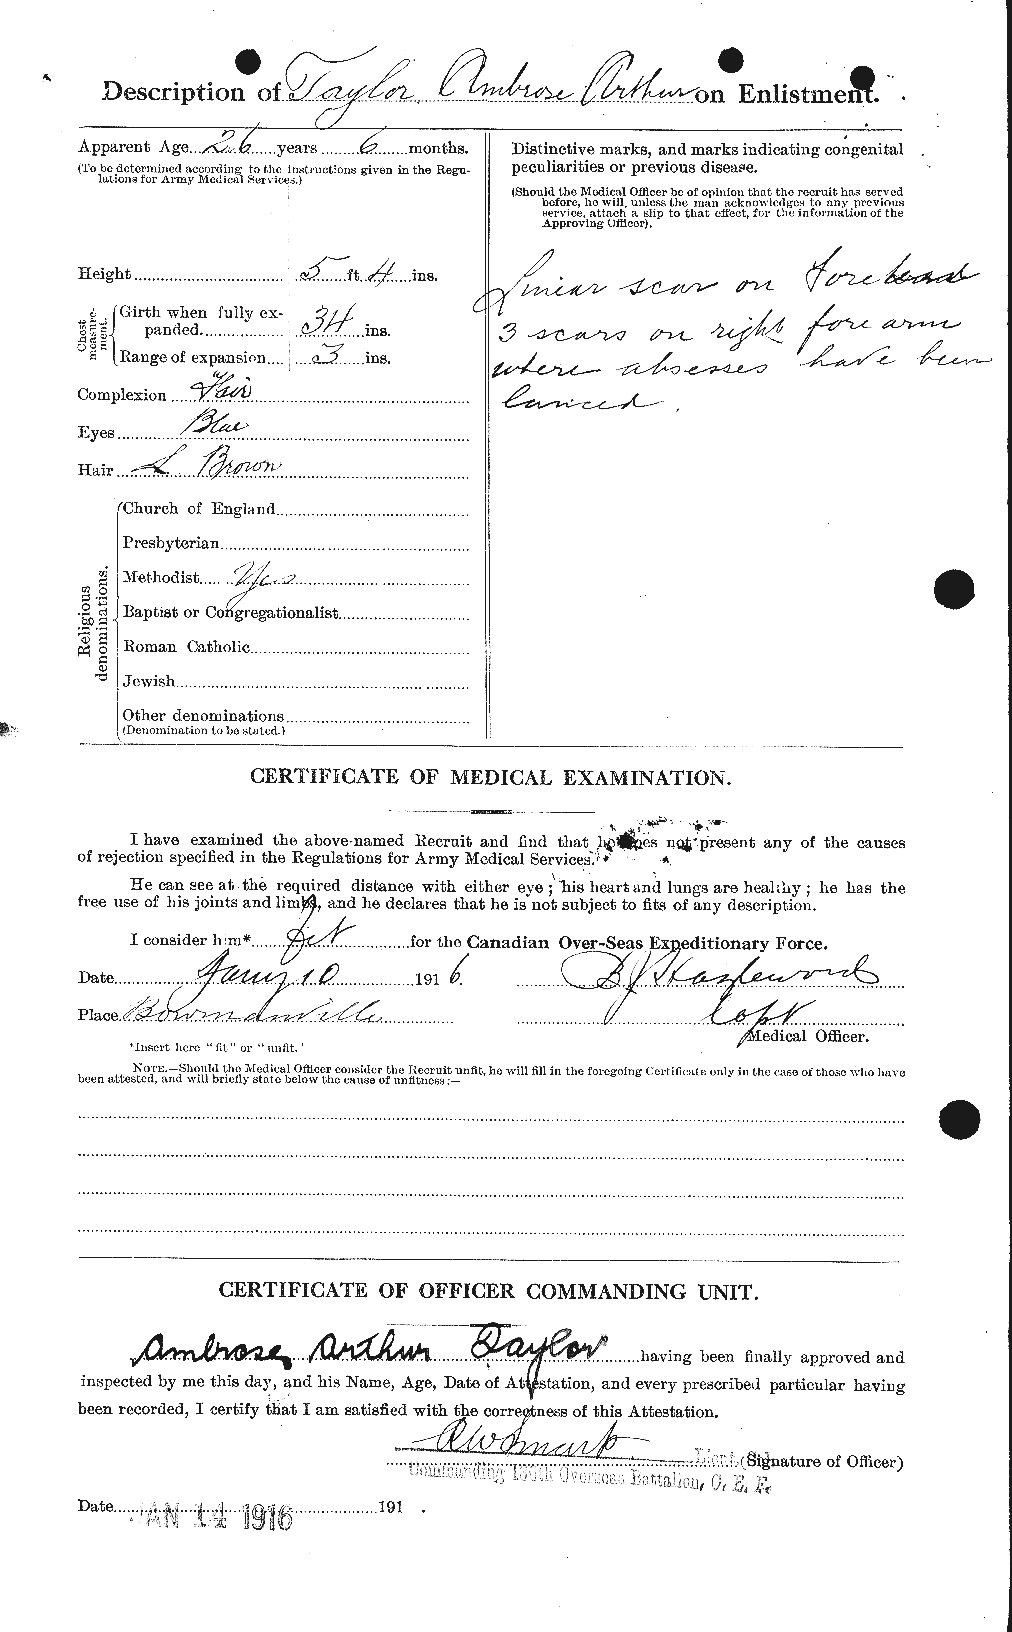 Personnel Records of the First World War - CEF 626217b